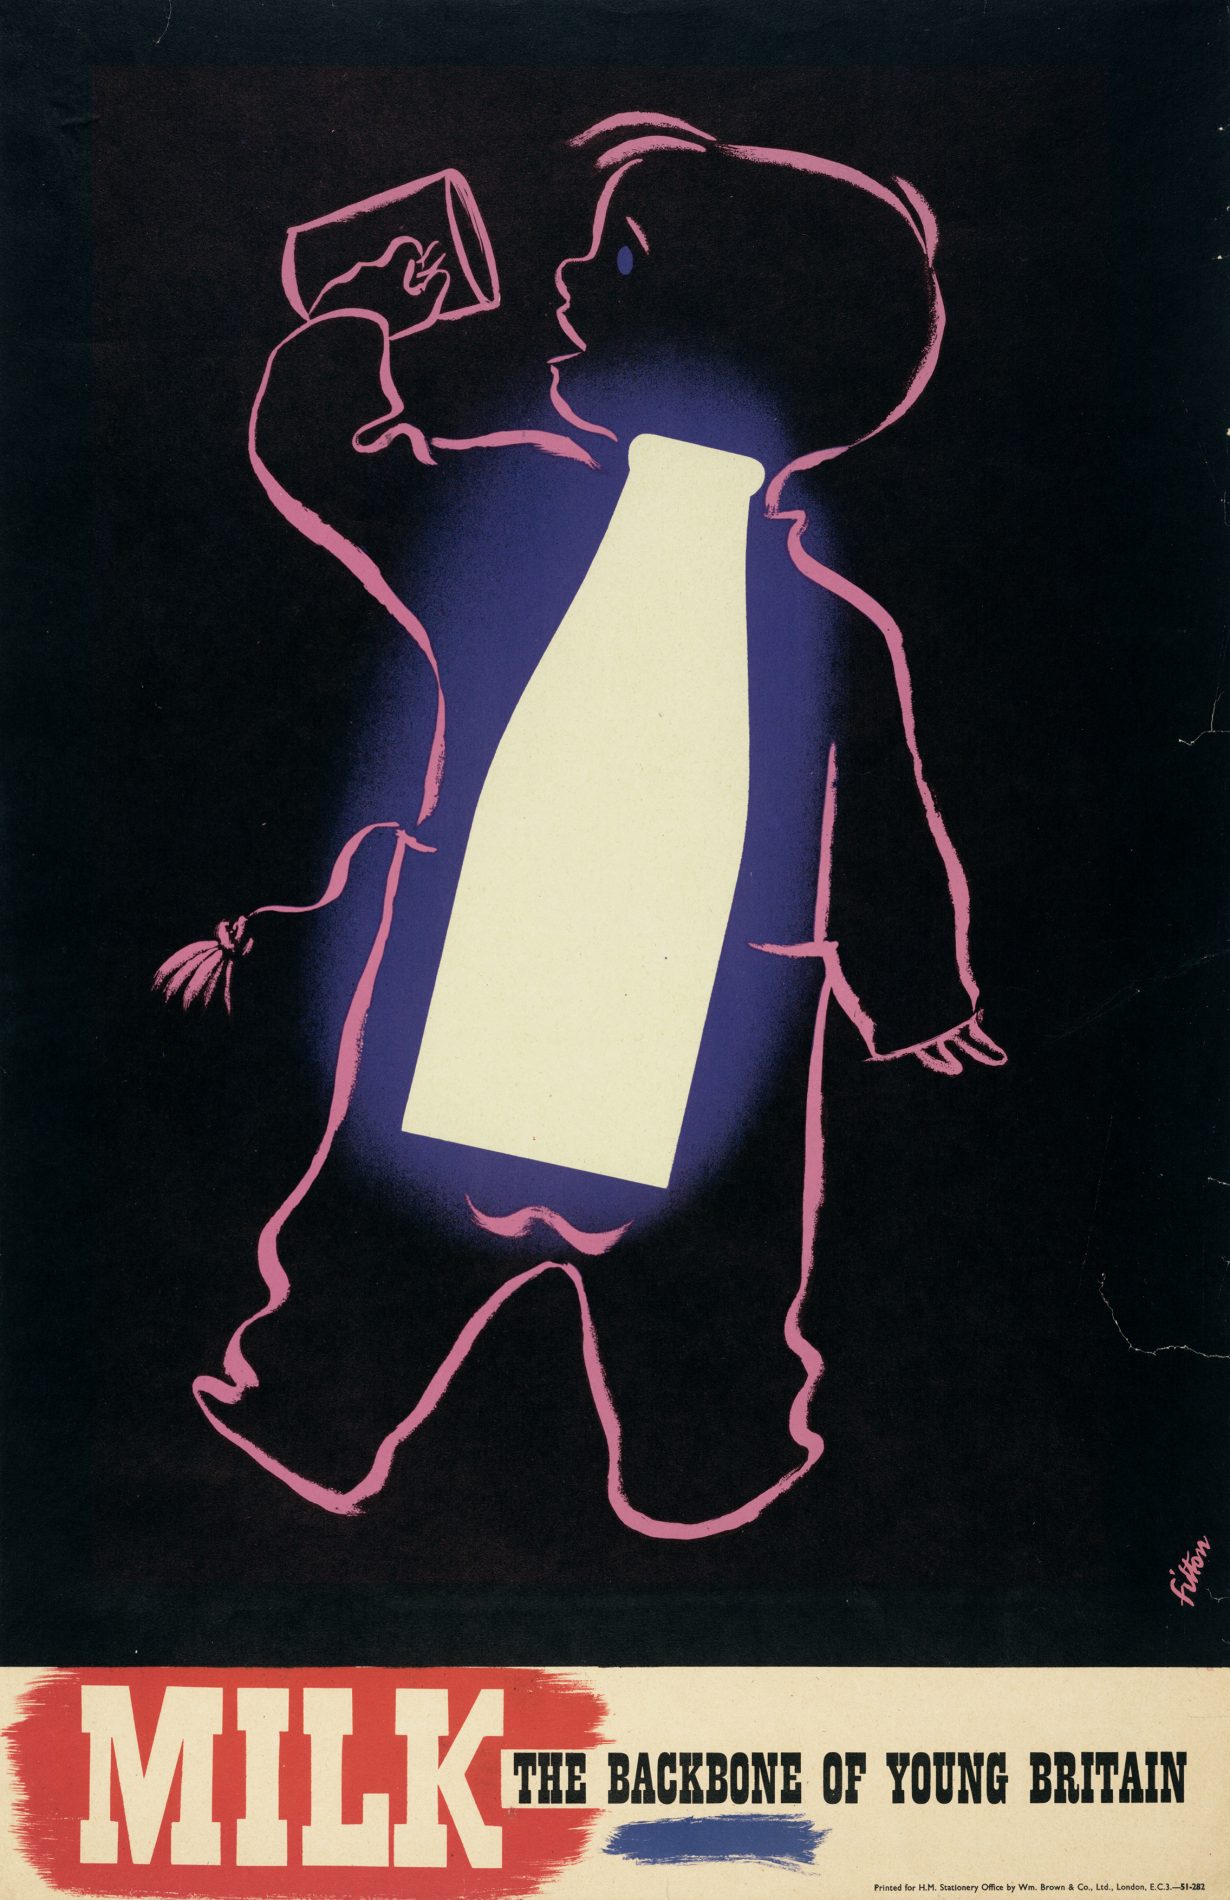 Poster promoting milk consumption in the uk, designed by James Fitton